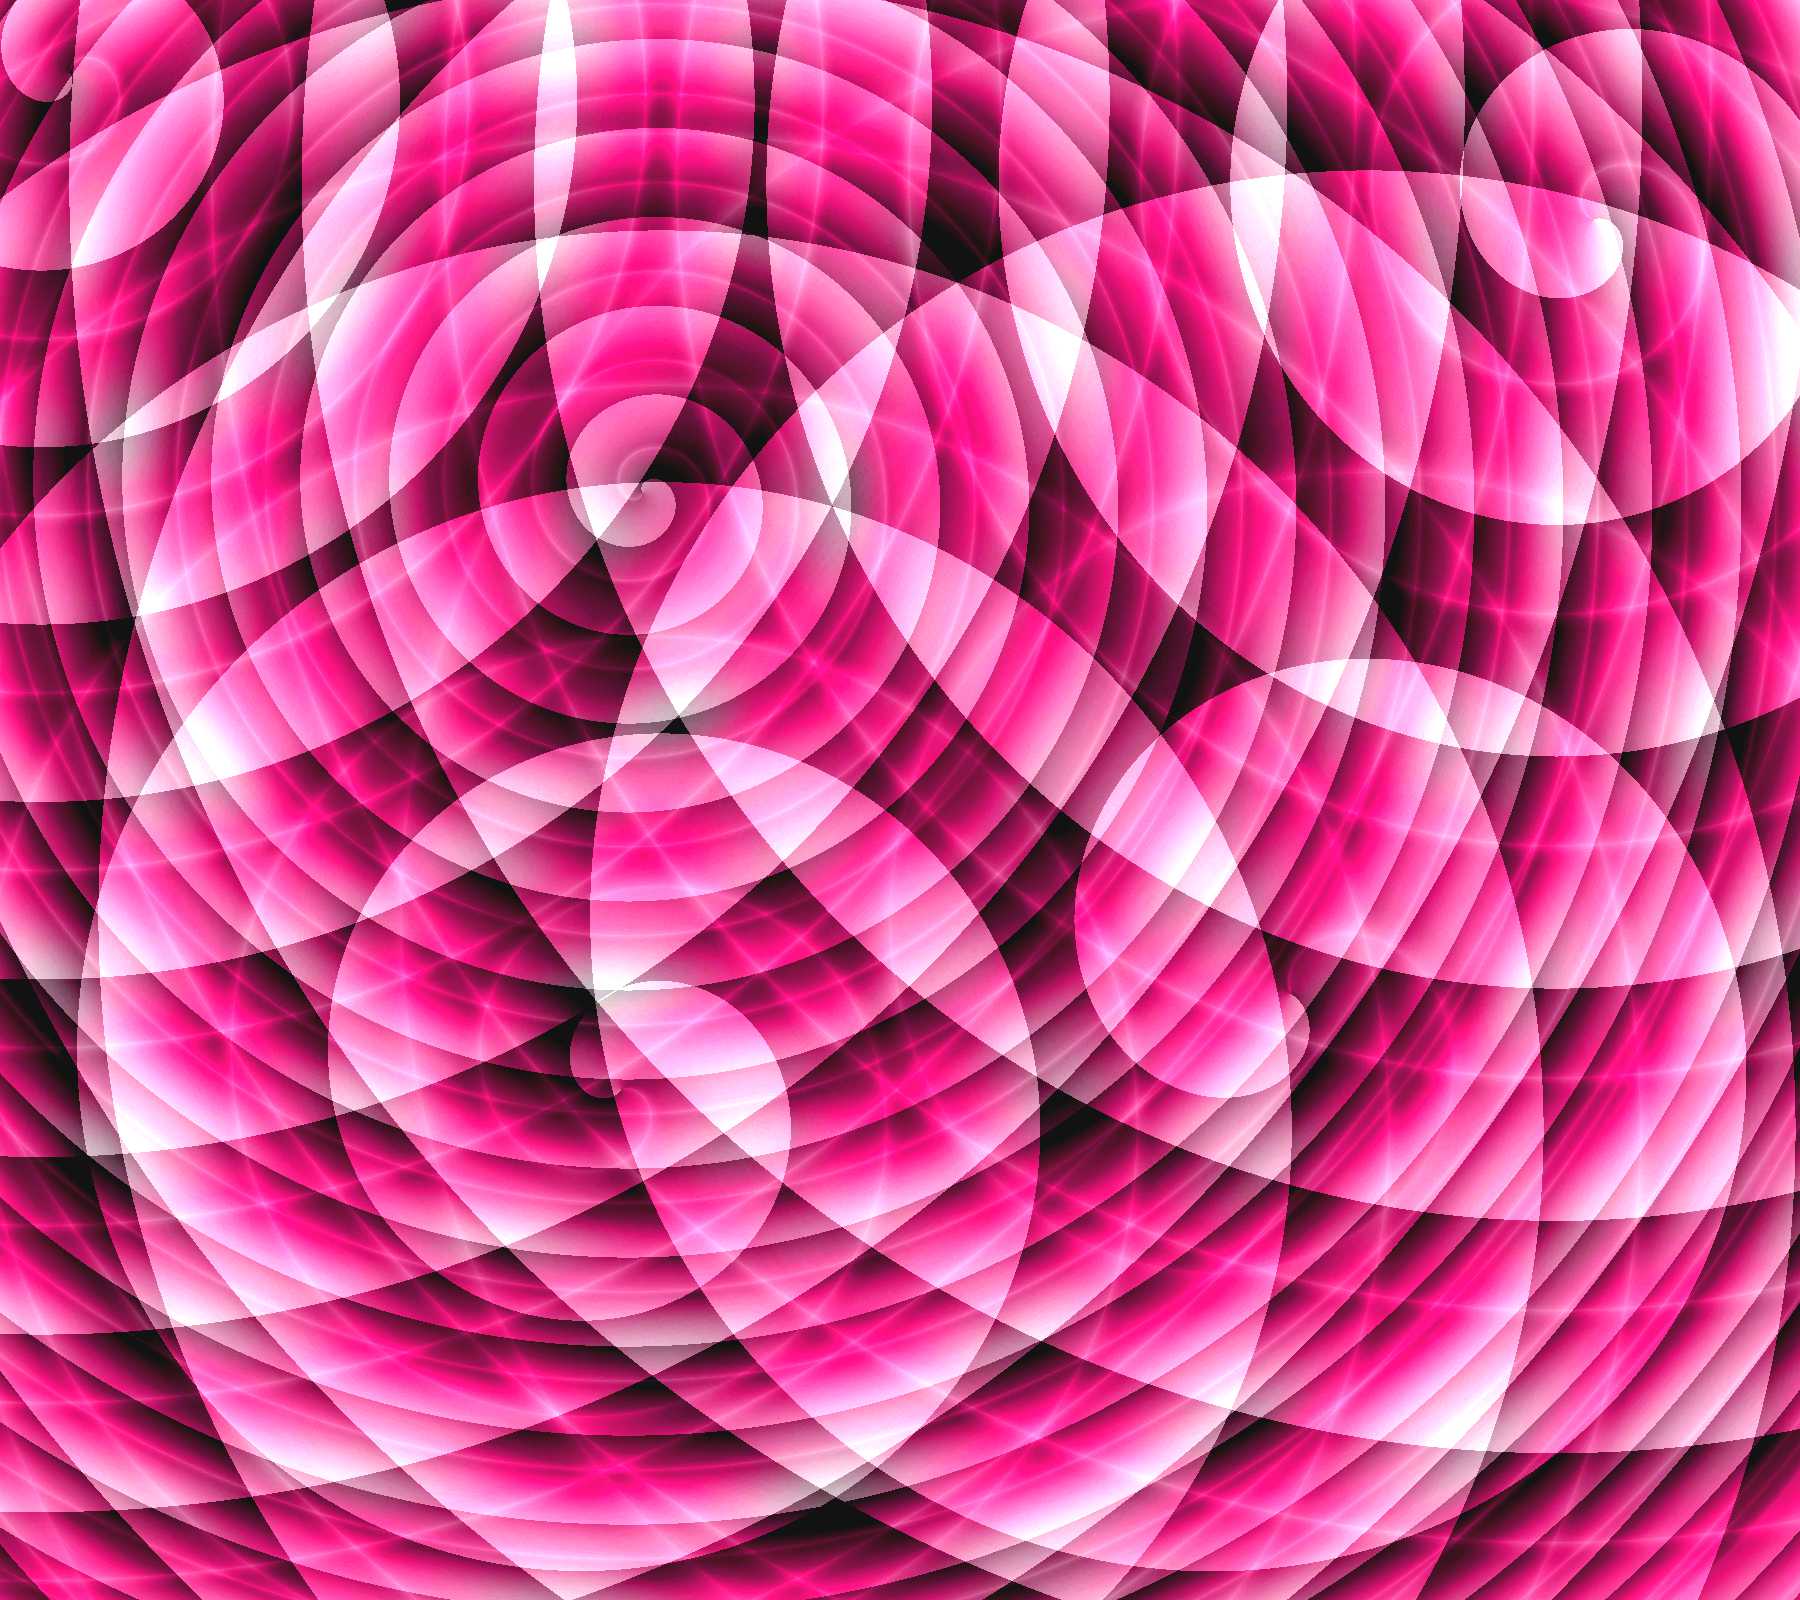 hot pink and black swirl backgrounds